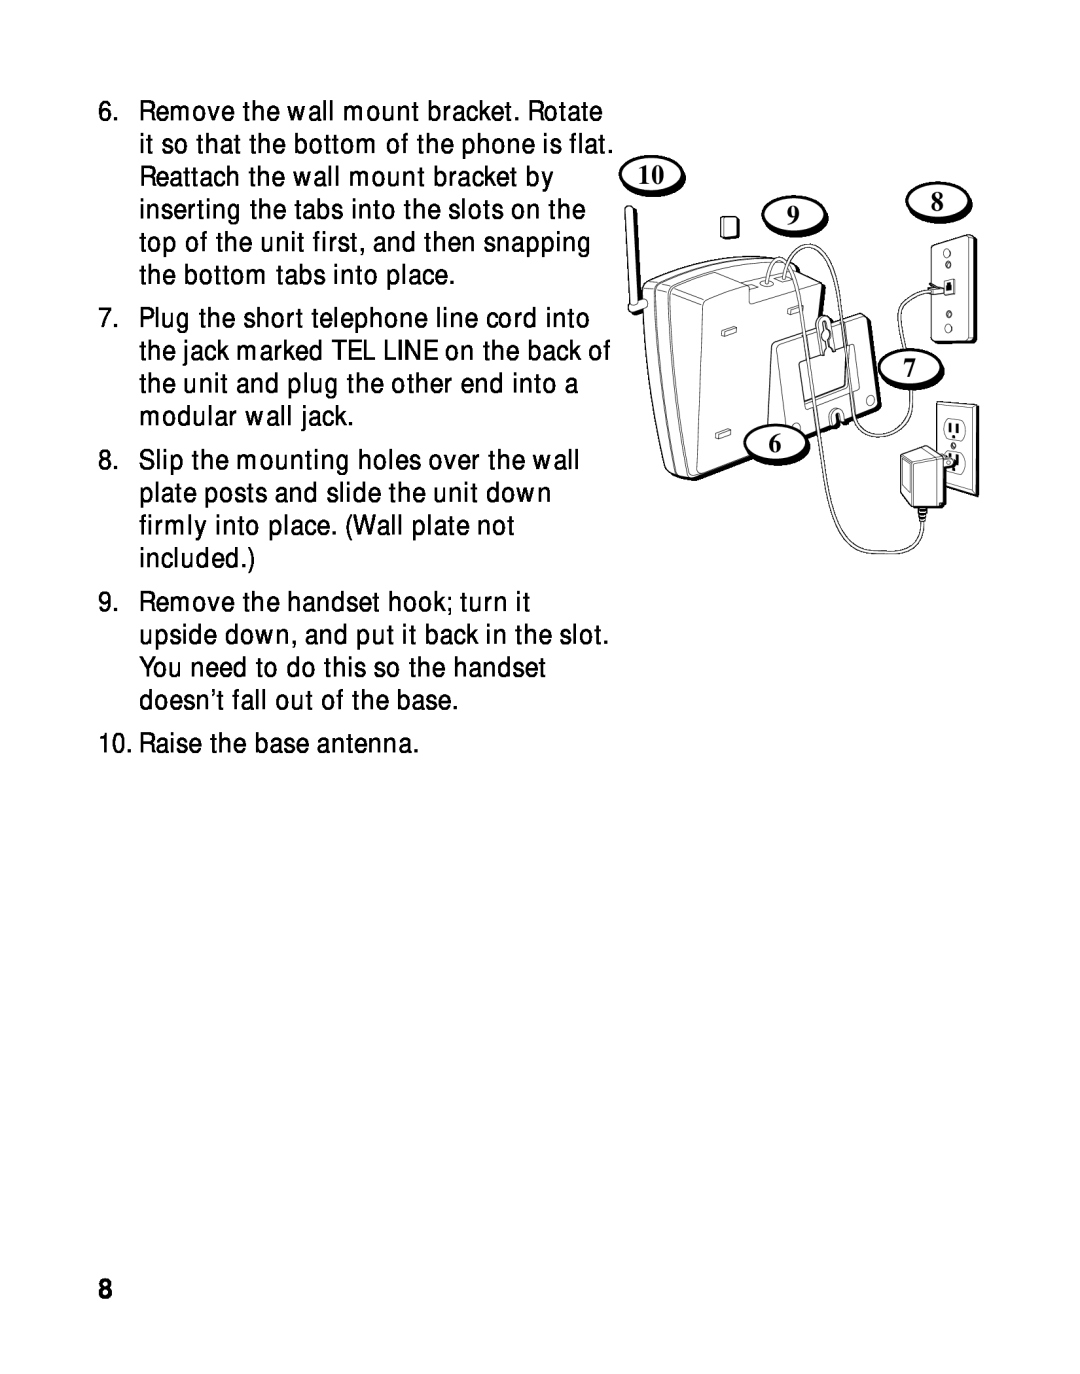 RCA 900 MHz manual Reattach the wall mount bracket by 